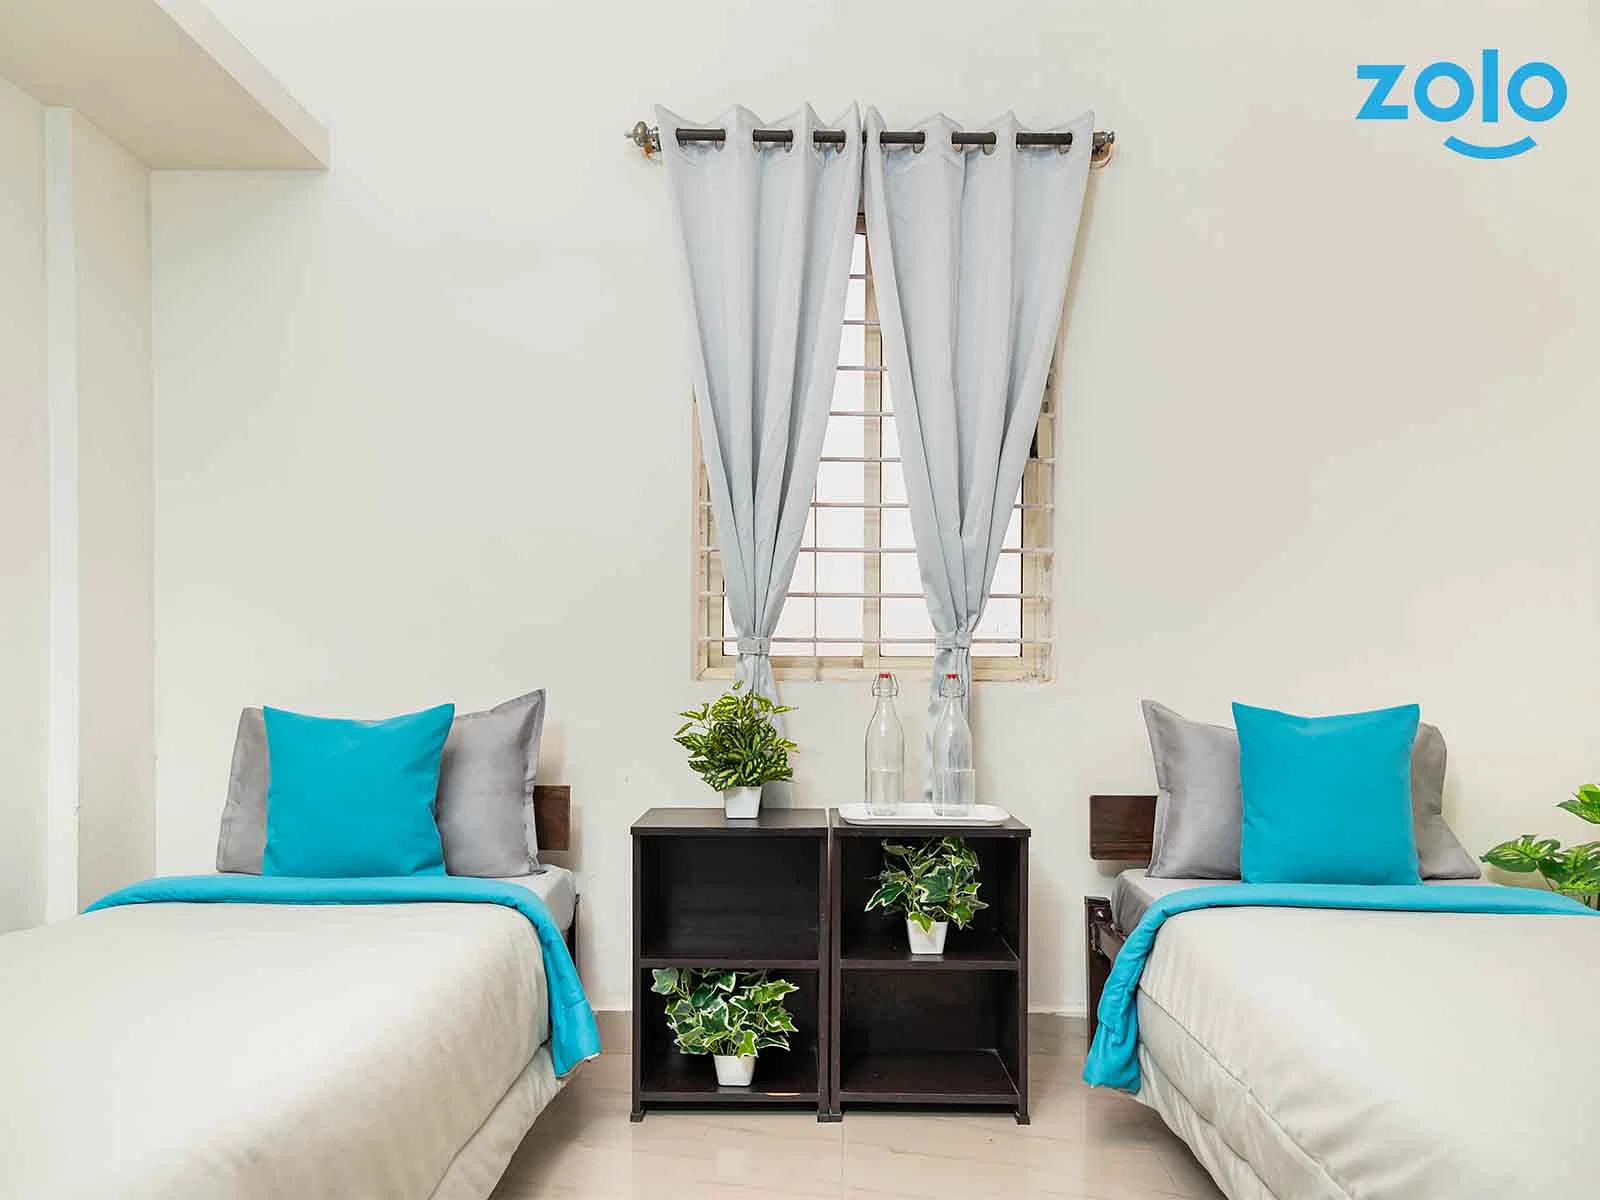 luxury PG accommodations with modern Wi-Fi, AC, and TV in Electronic City Phase 2-Bangalore-Zolo Atlantis